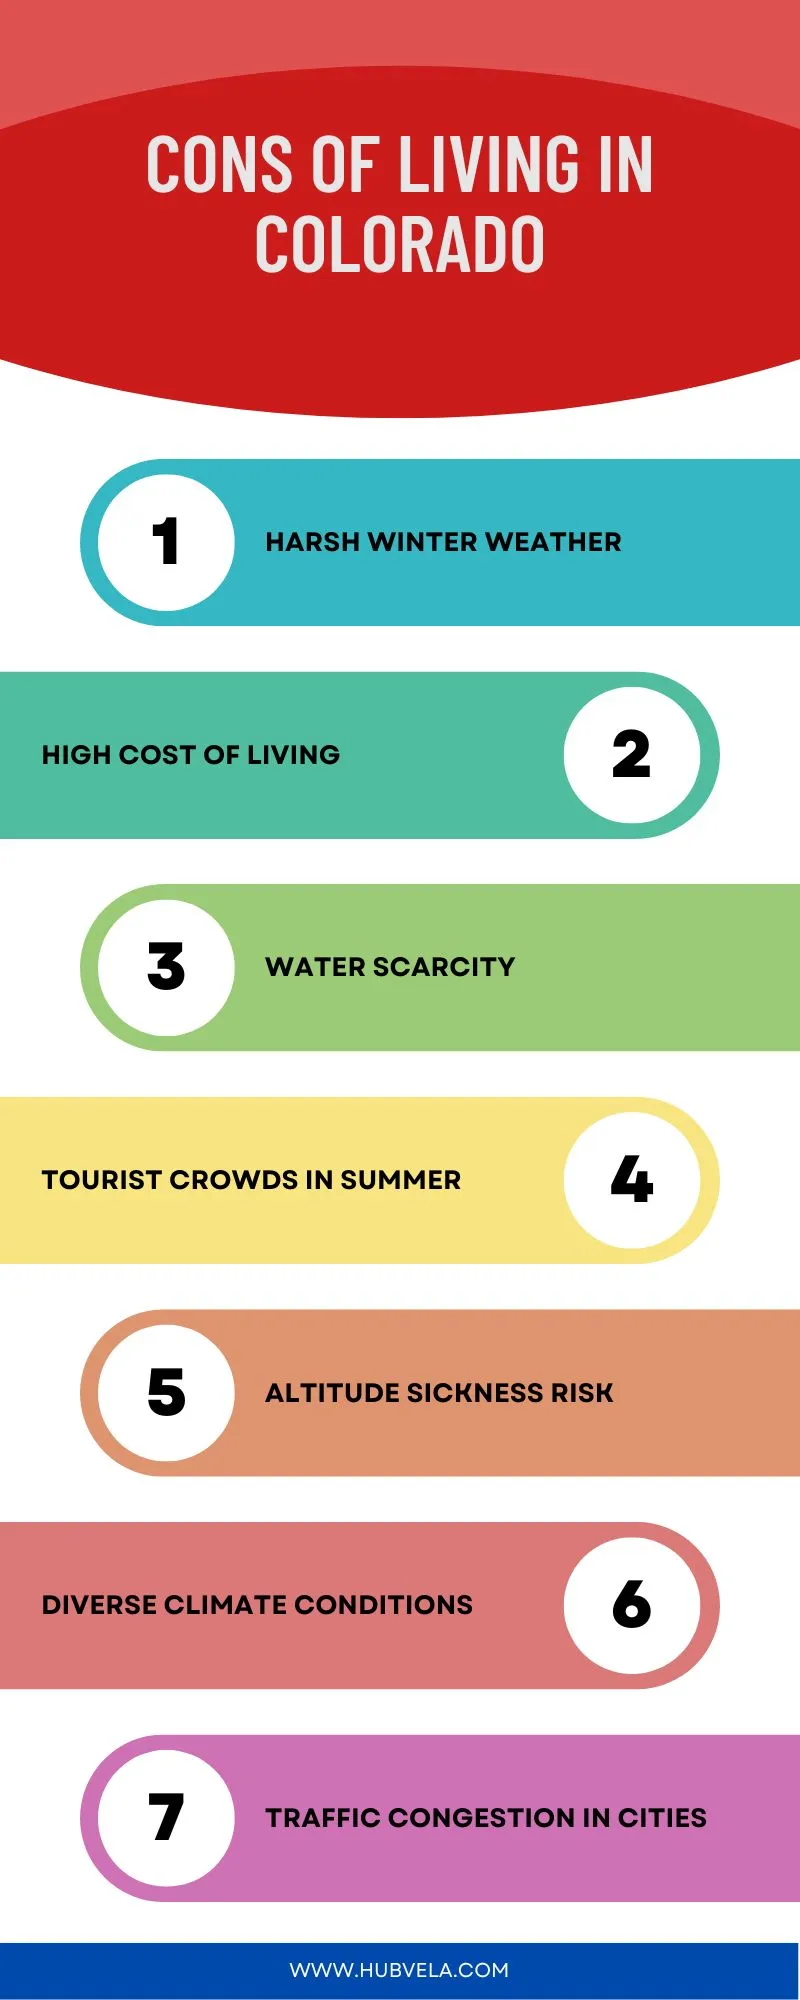 Cons of Living in Colorado Infographic